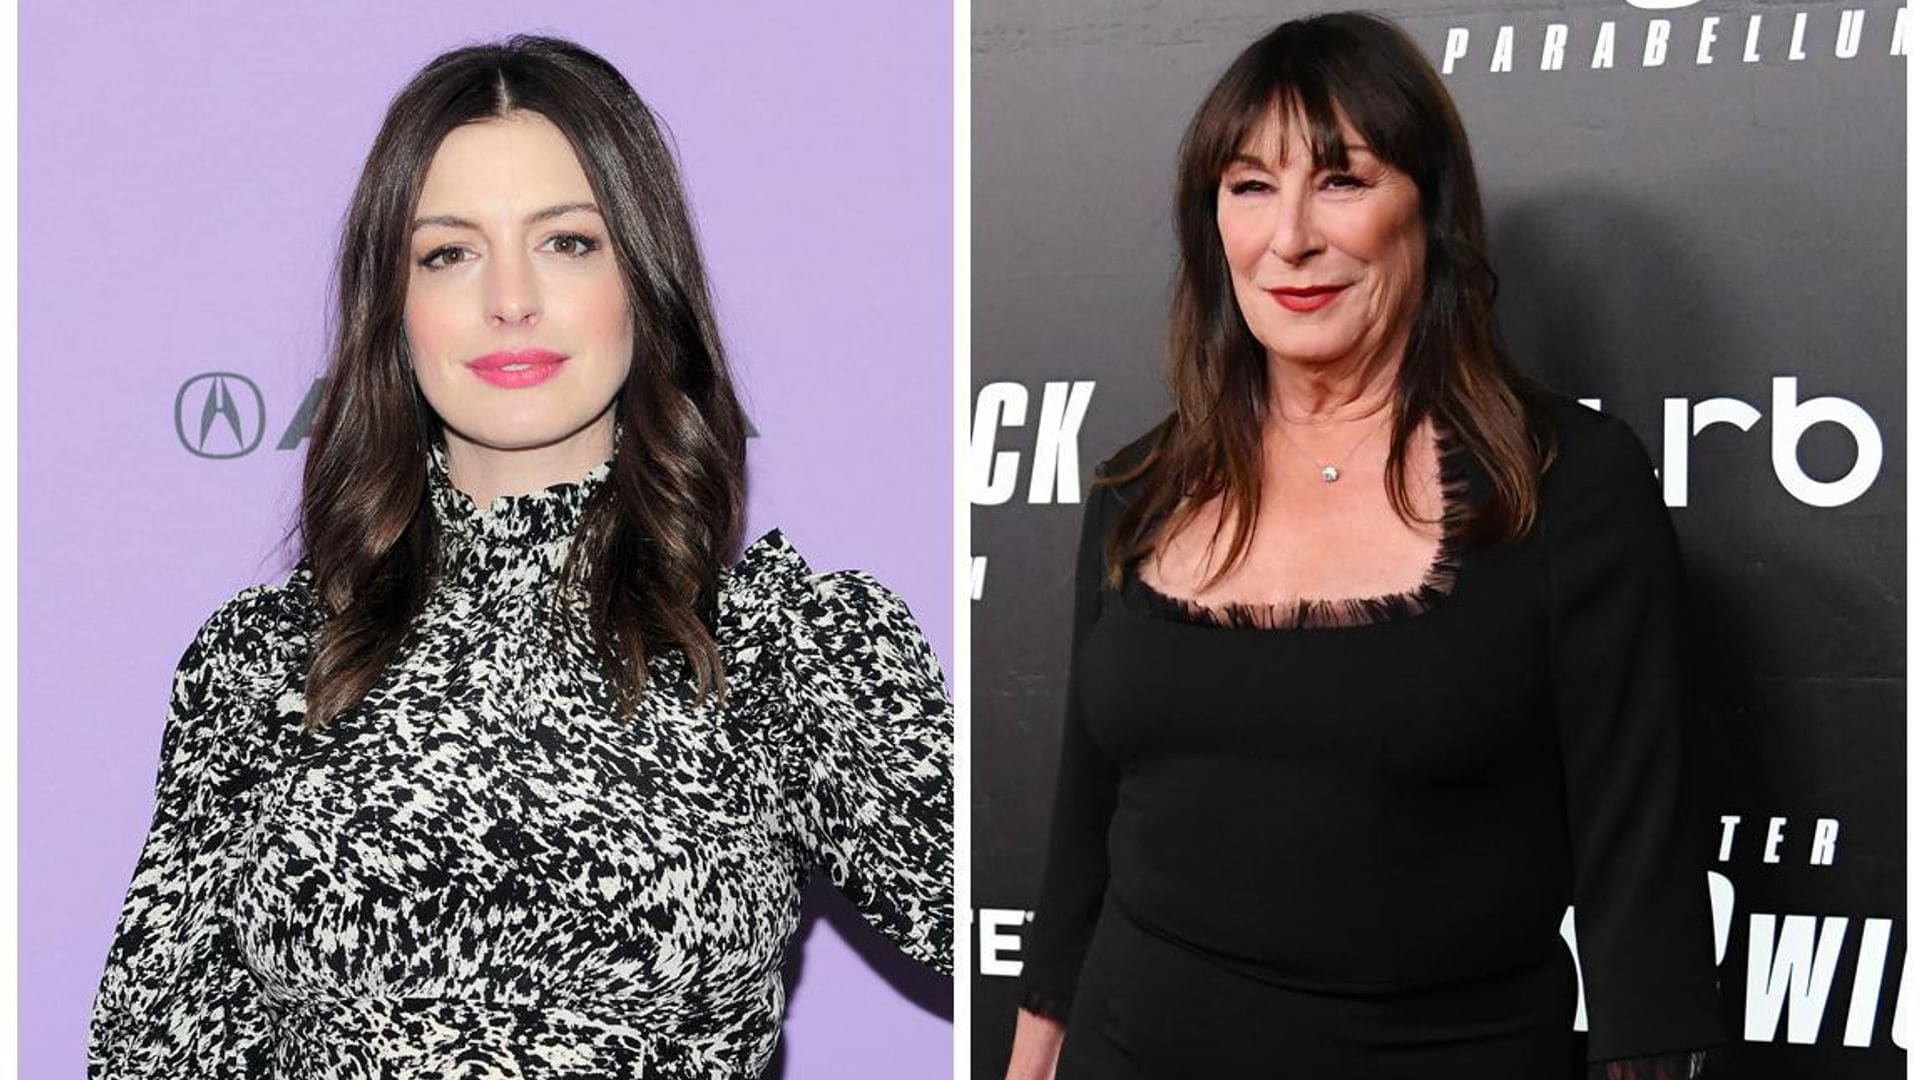 Anne Hathaway and Anjelica Huston